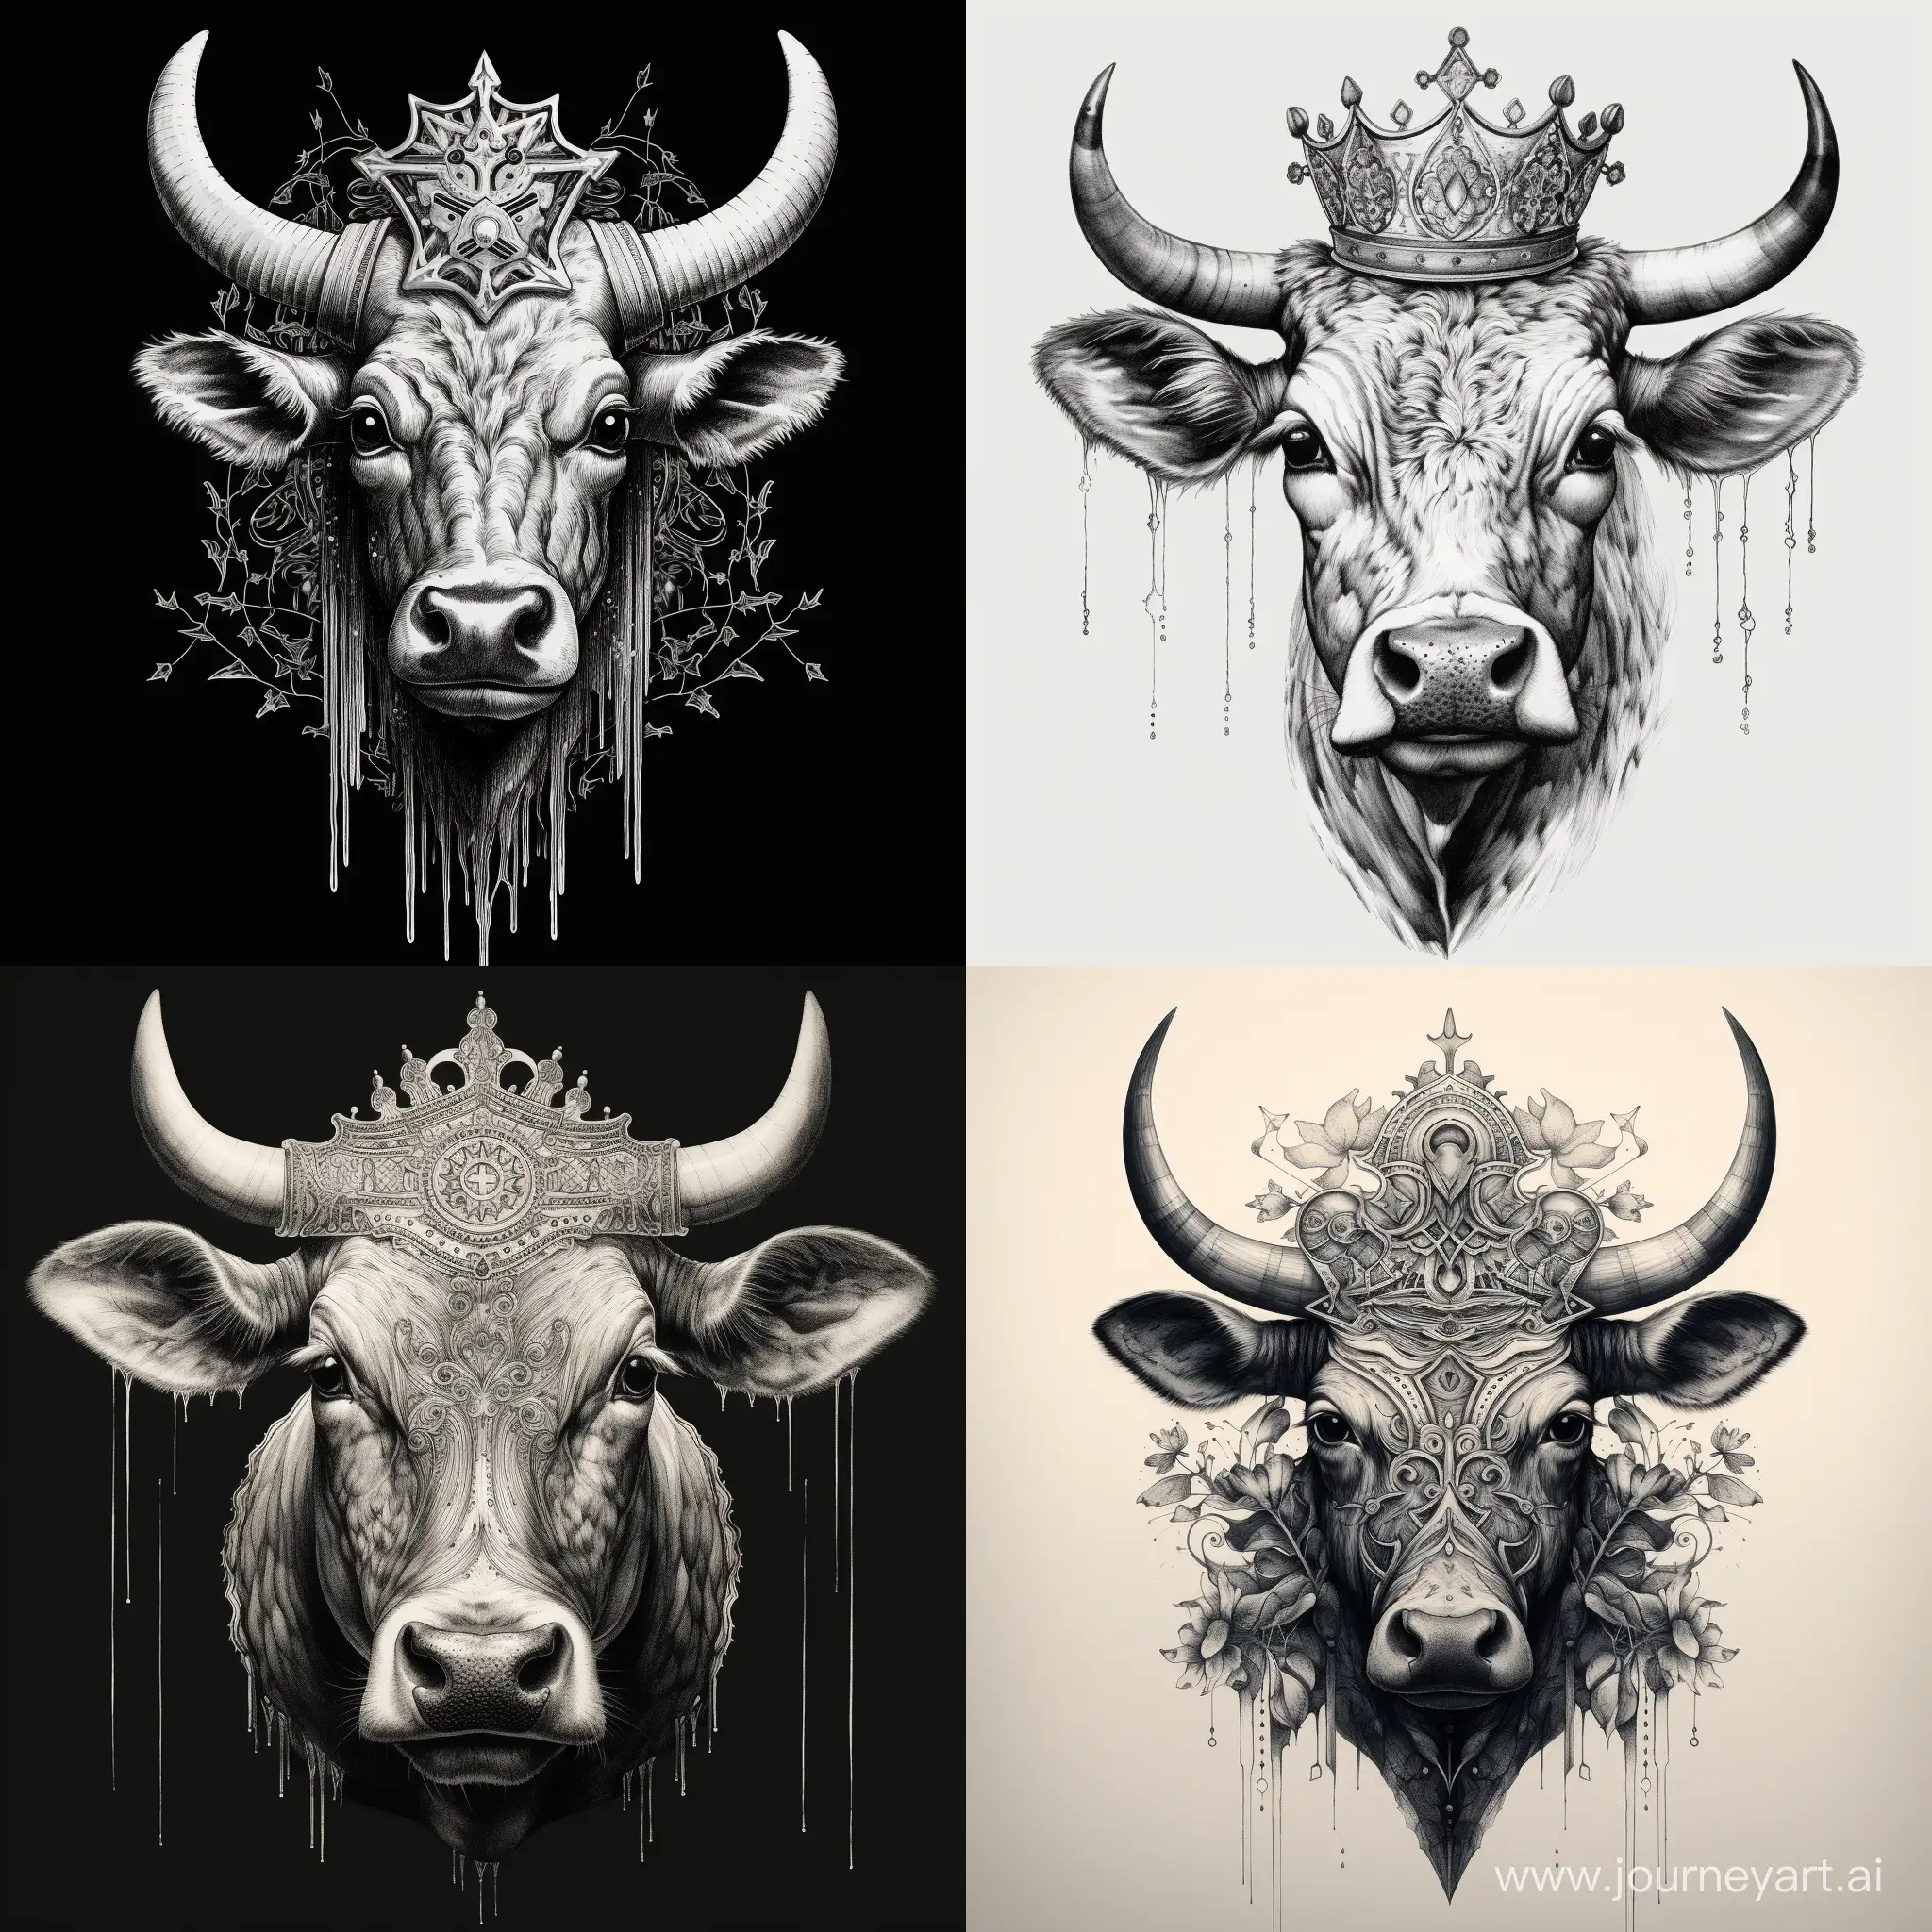 Mystical-Engraving-Cow-Portrait-with-Crown-of-Thorns-and-Magical-Elements